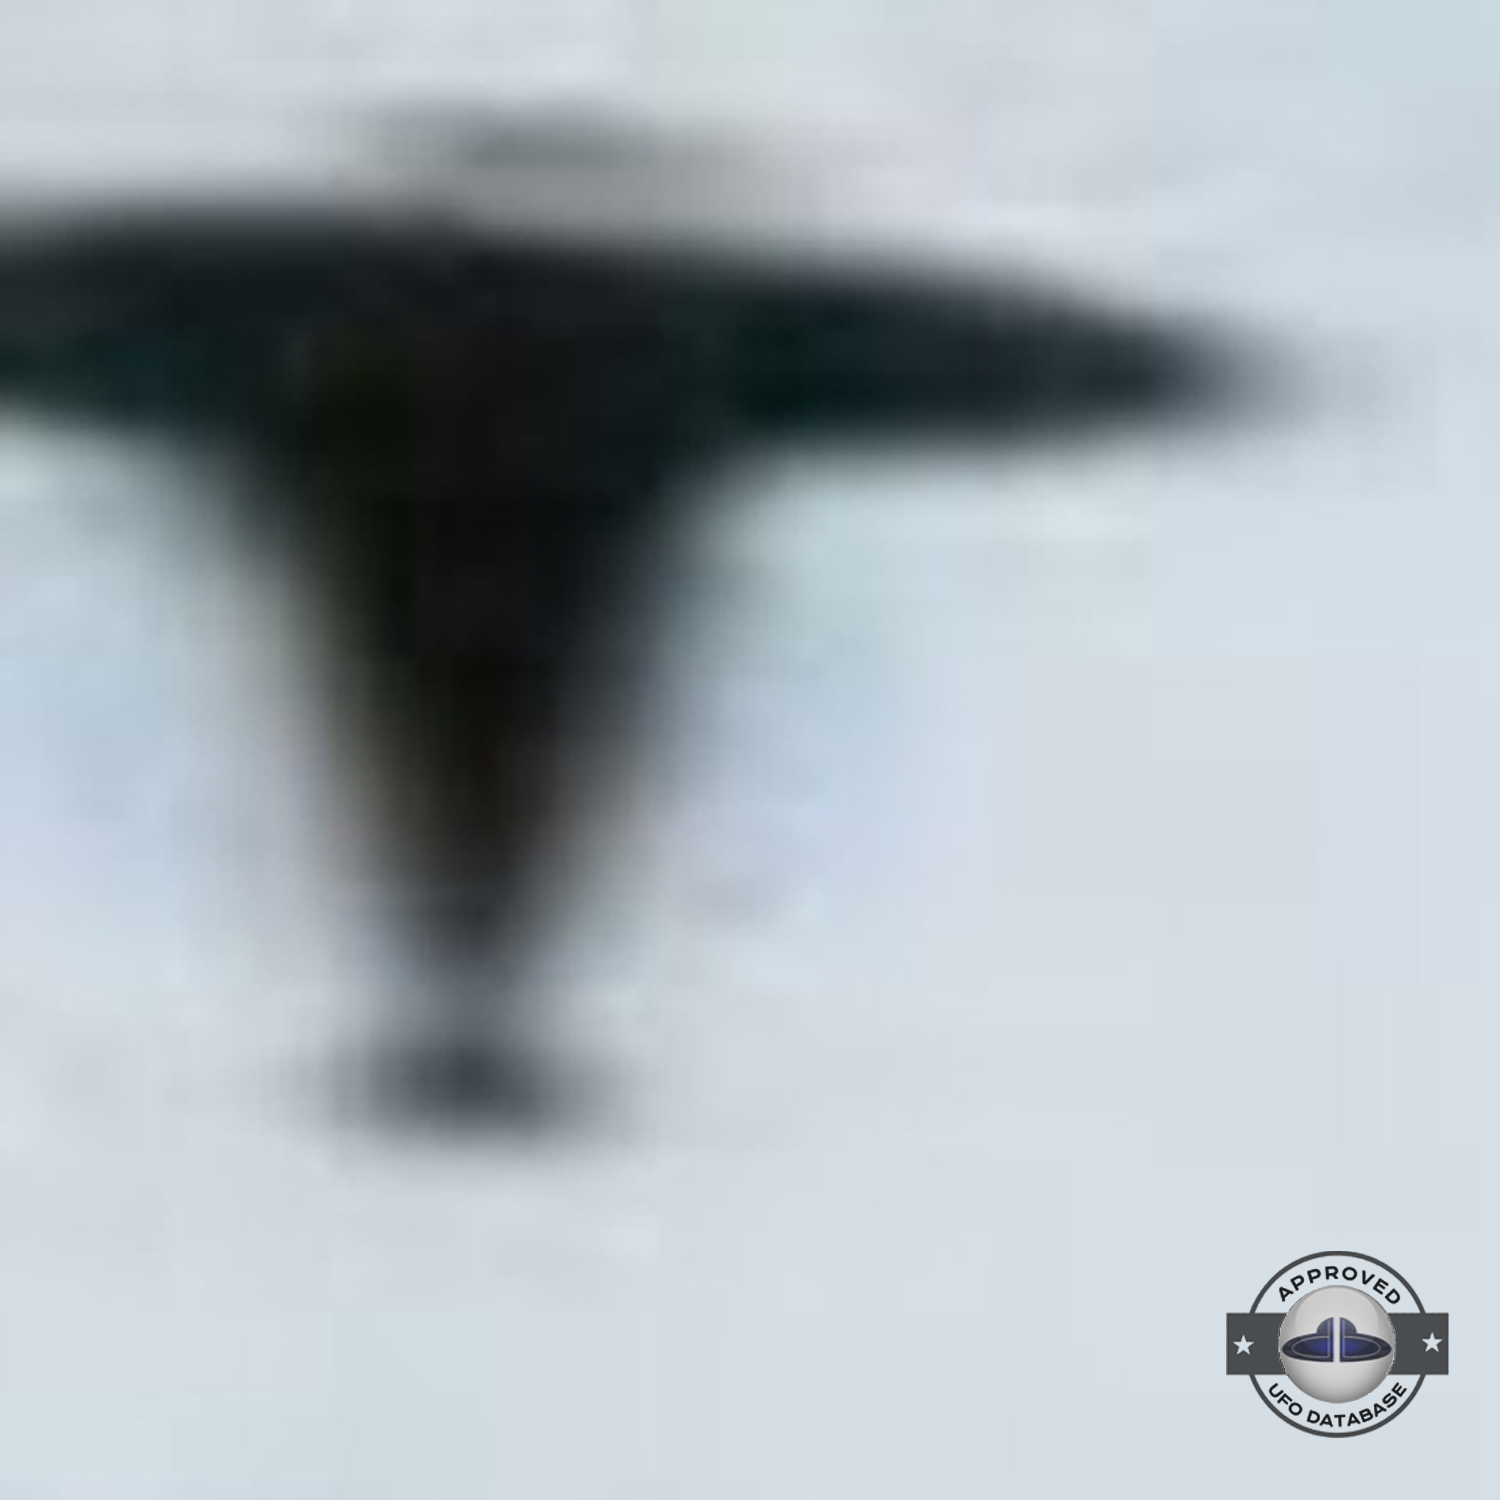 UFO picture taken from moving Train | Oberwesel, Germany | March 1964 UFO Picture #178-5